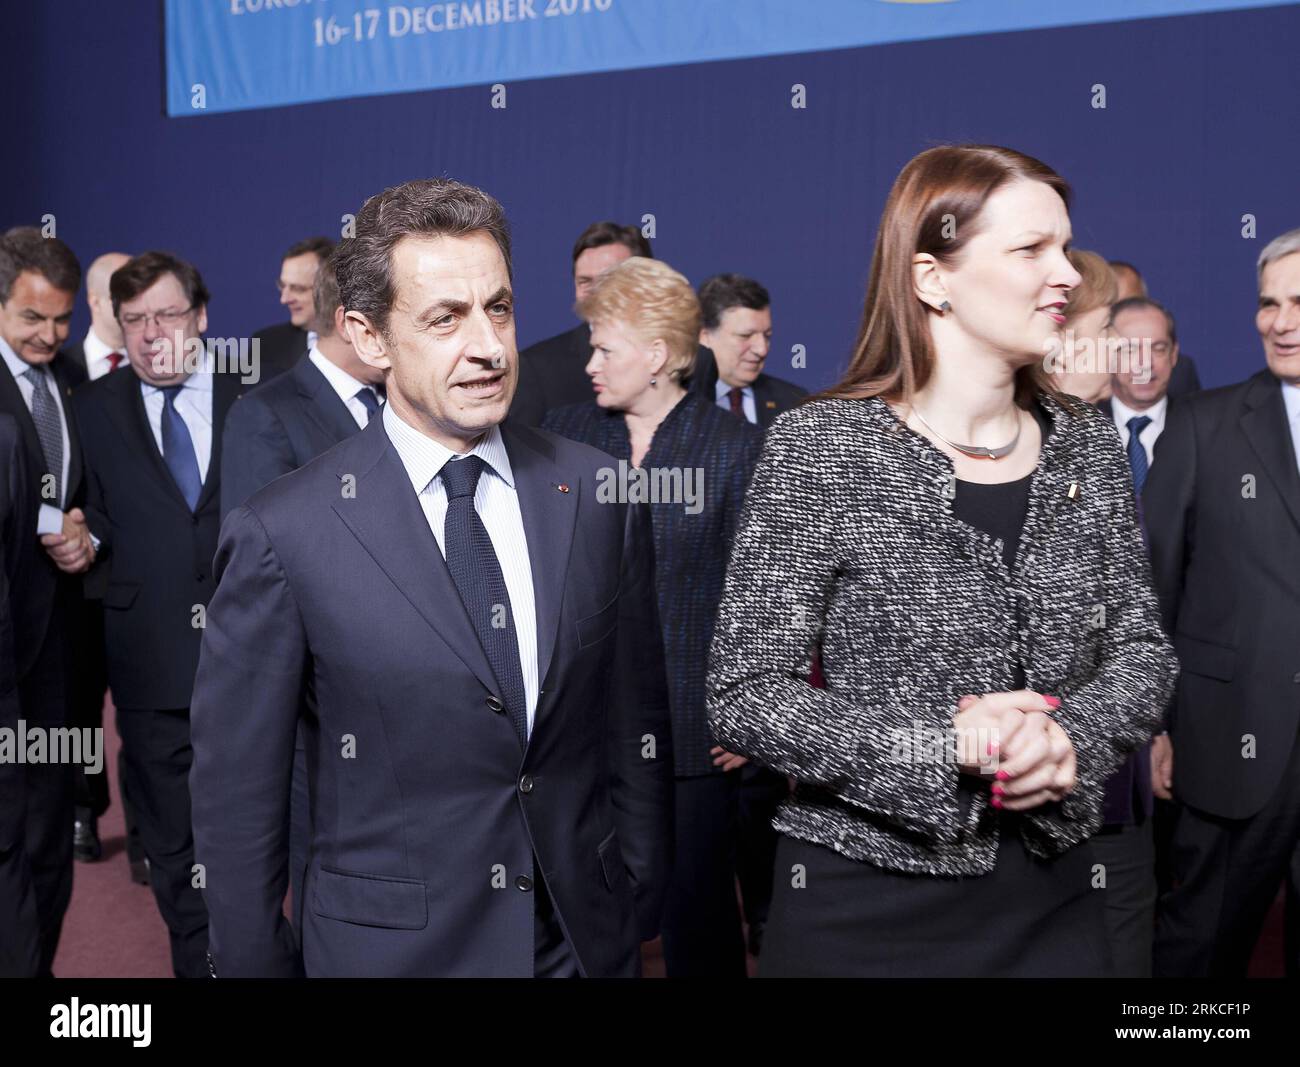 Bildnummer: 54755249  Datum: 16.12.2010  Copyright: imago/Xinhua (101216) -- BRUSSELS, Dec. 16, 2010 (Xinhua) -- French President Nicolas Sarkozy (L) and Finnish Prime Minister Mari Kiviniemi leave after a familly photo during the EU Summit at the EU headquarters in Brussels, capital of Belgium, on Dec. 16, 2010. EU leaders began their two-day summit on Thursday, looking to amend the Lisbon treaty to pave the way for the establishment of a permanent rescue mechanism to restore market confidence. (Xinhua/Thierry Monasse) (zw) BELGIUM-BRUSSELS-EU-SUMMIT PUBLICATIONxNOTxINxCHN Politik People EU G Stock Photo